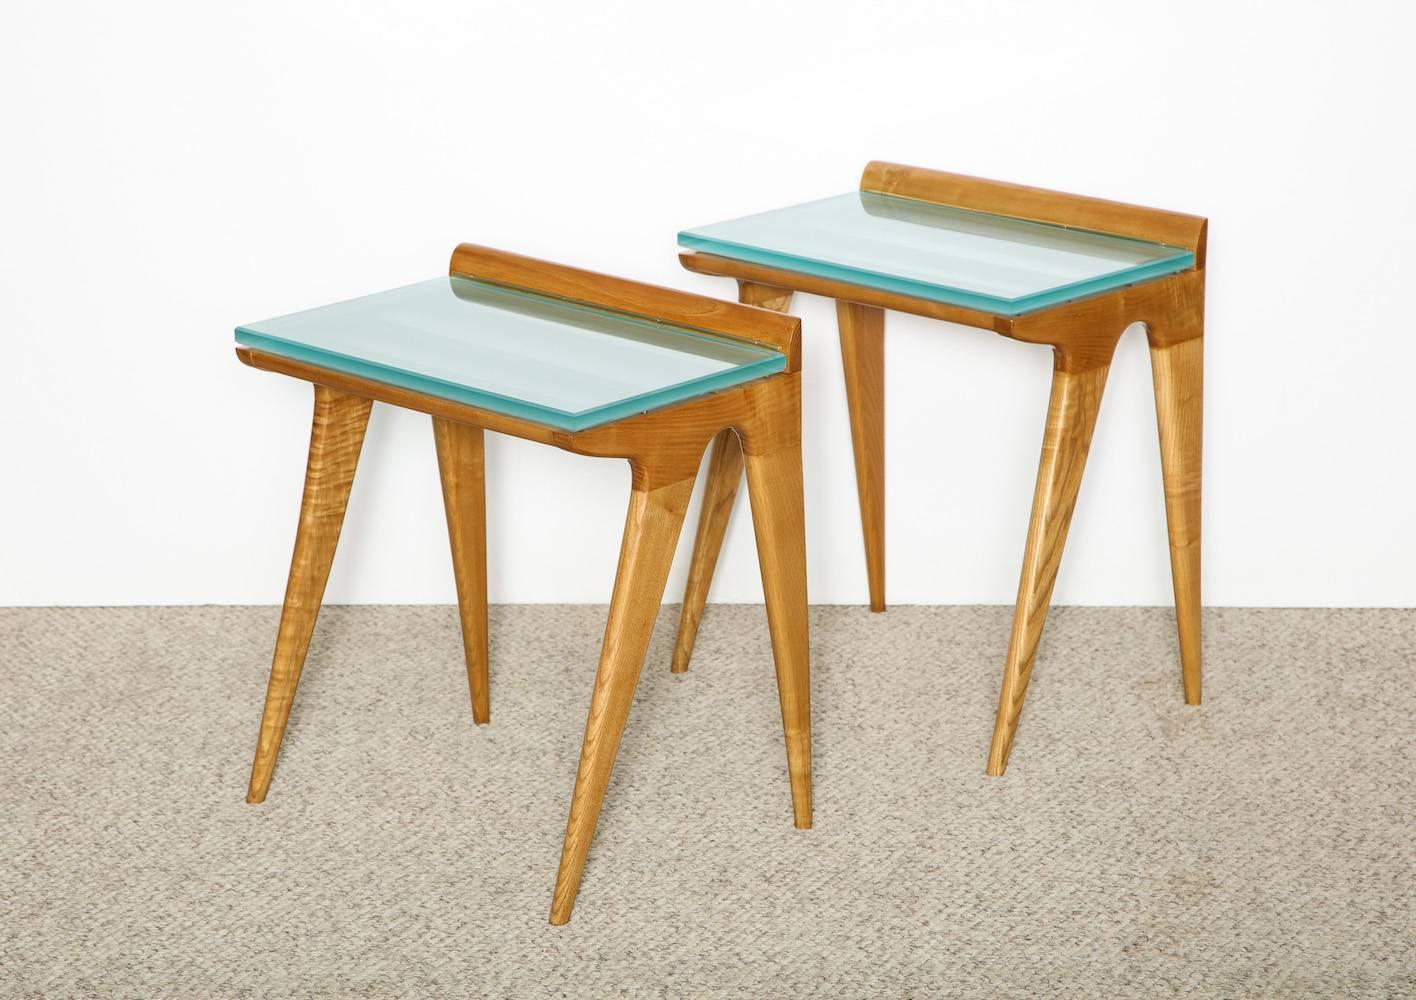 Custom side tables by Gio Ponti. Originally designed as petite luggage stands for a hotel outside of Florence. Bleached ash-wood, with brass runners and newly-made slab glass tops with frosted undersides. Great architectural forms in excellent